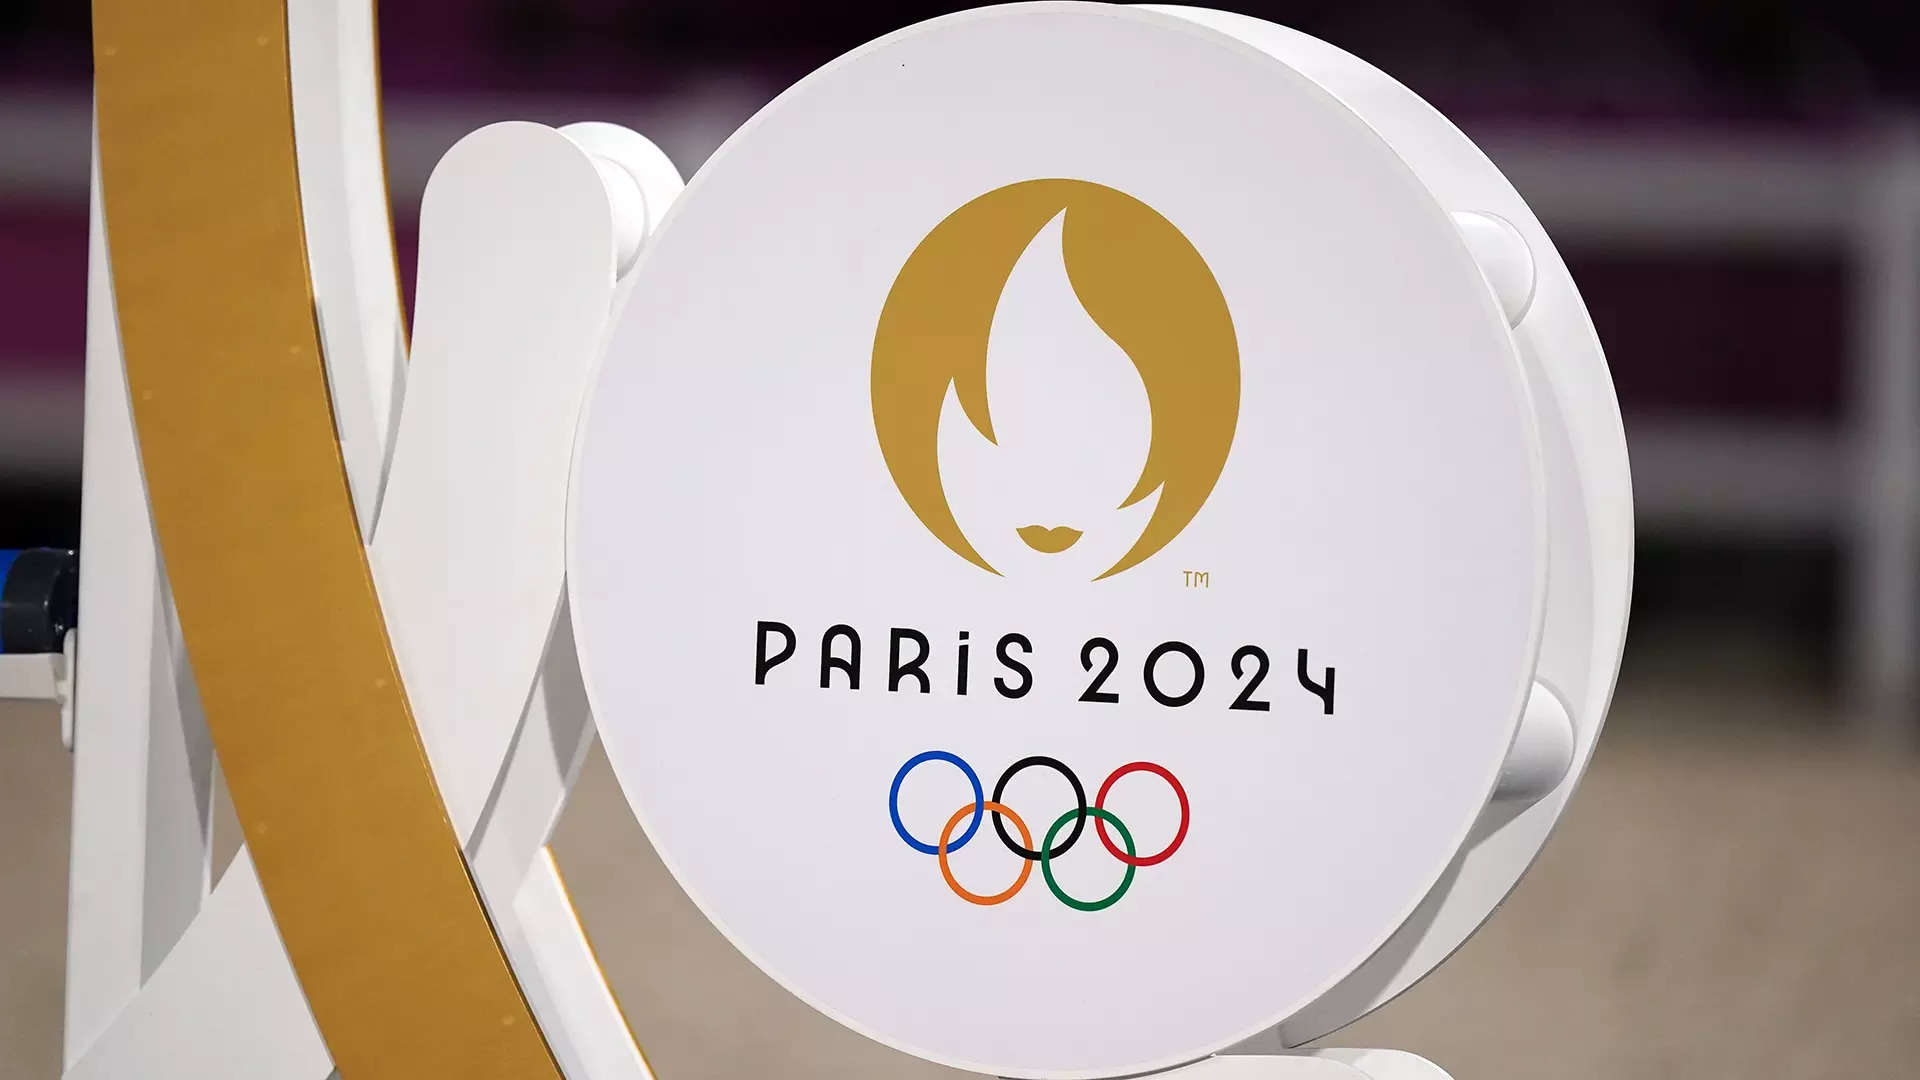 Paris Olympics 2024 Schedule today, August 5: Here’s how to watch the events live on TV and streaming 